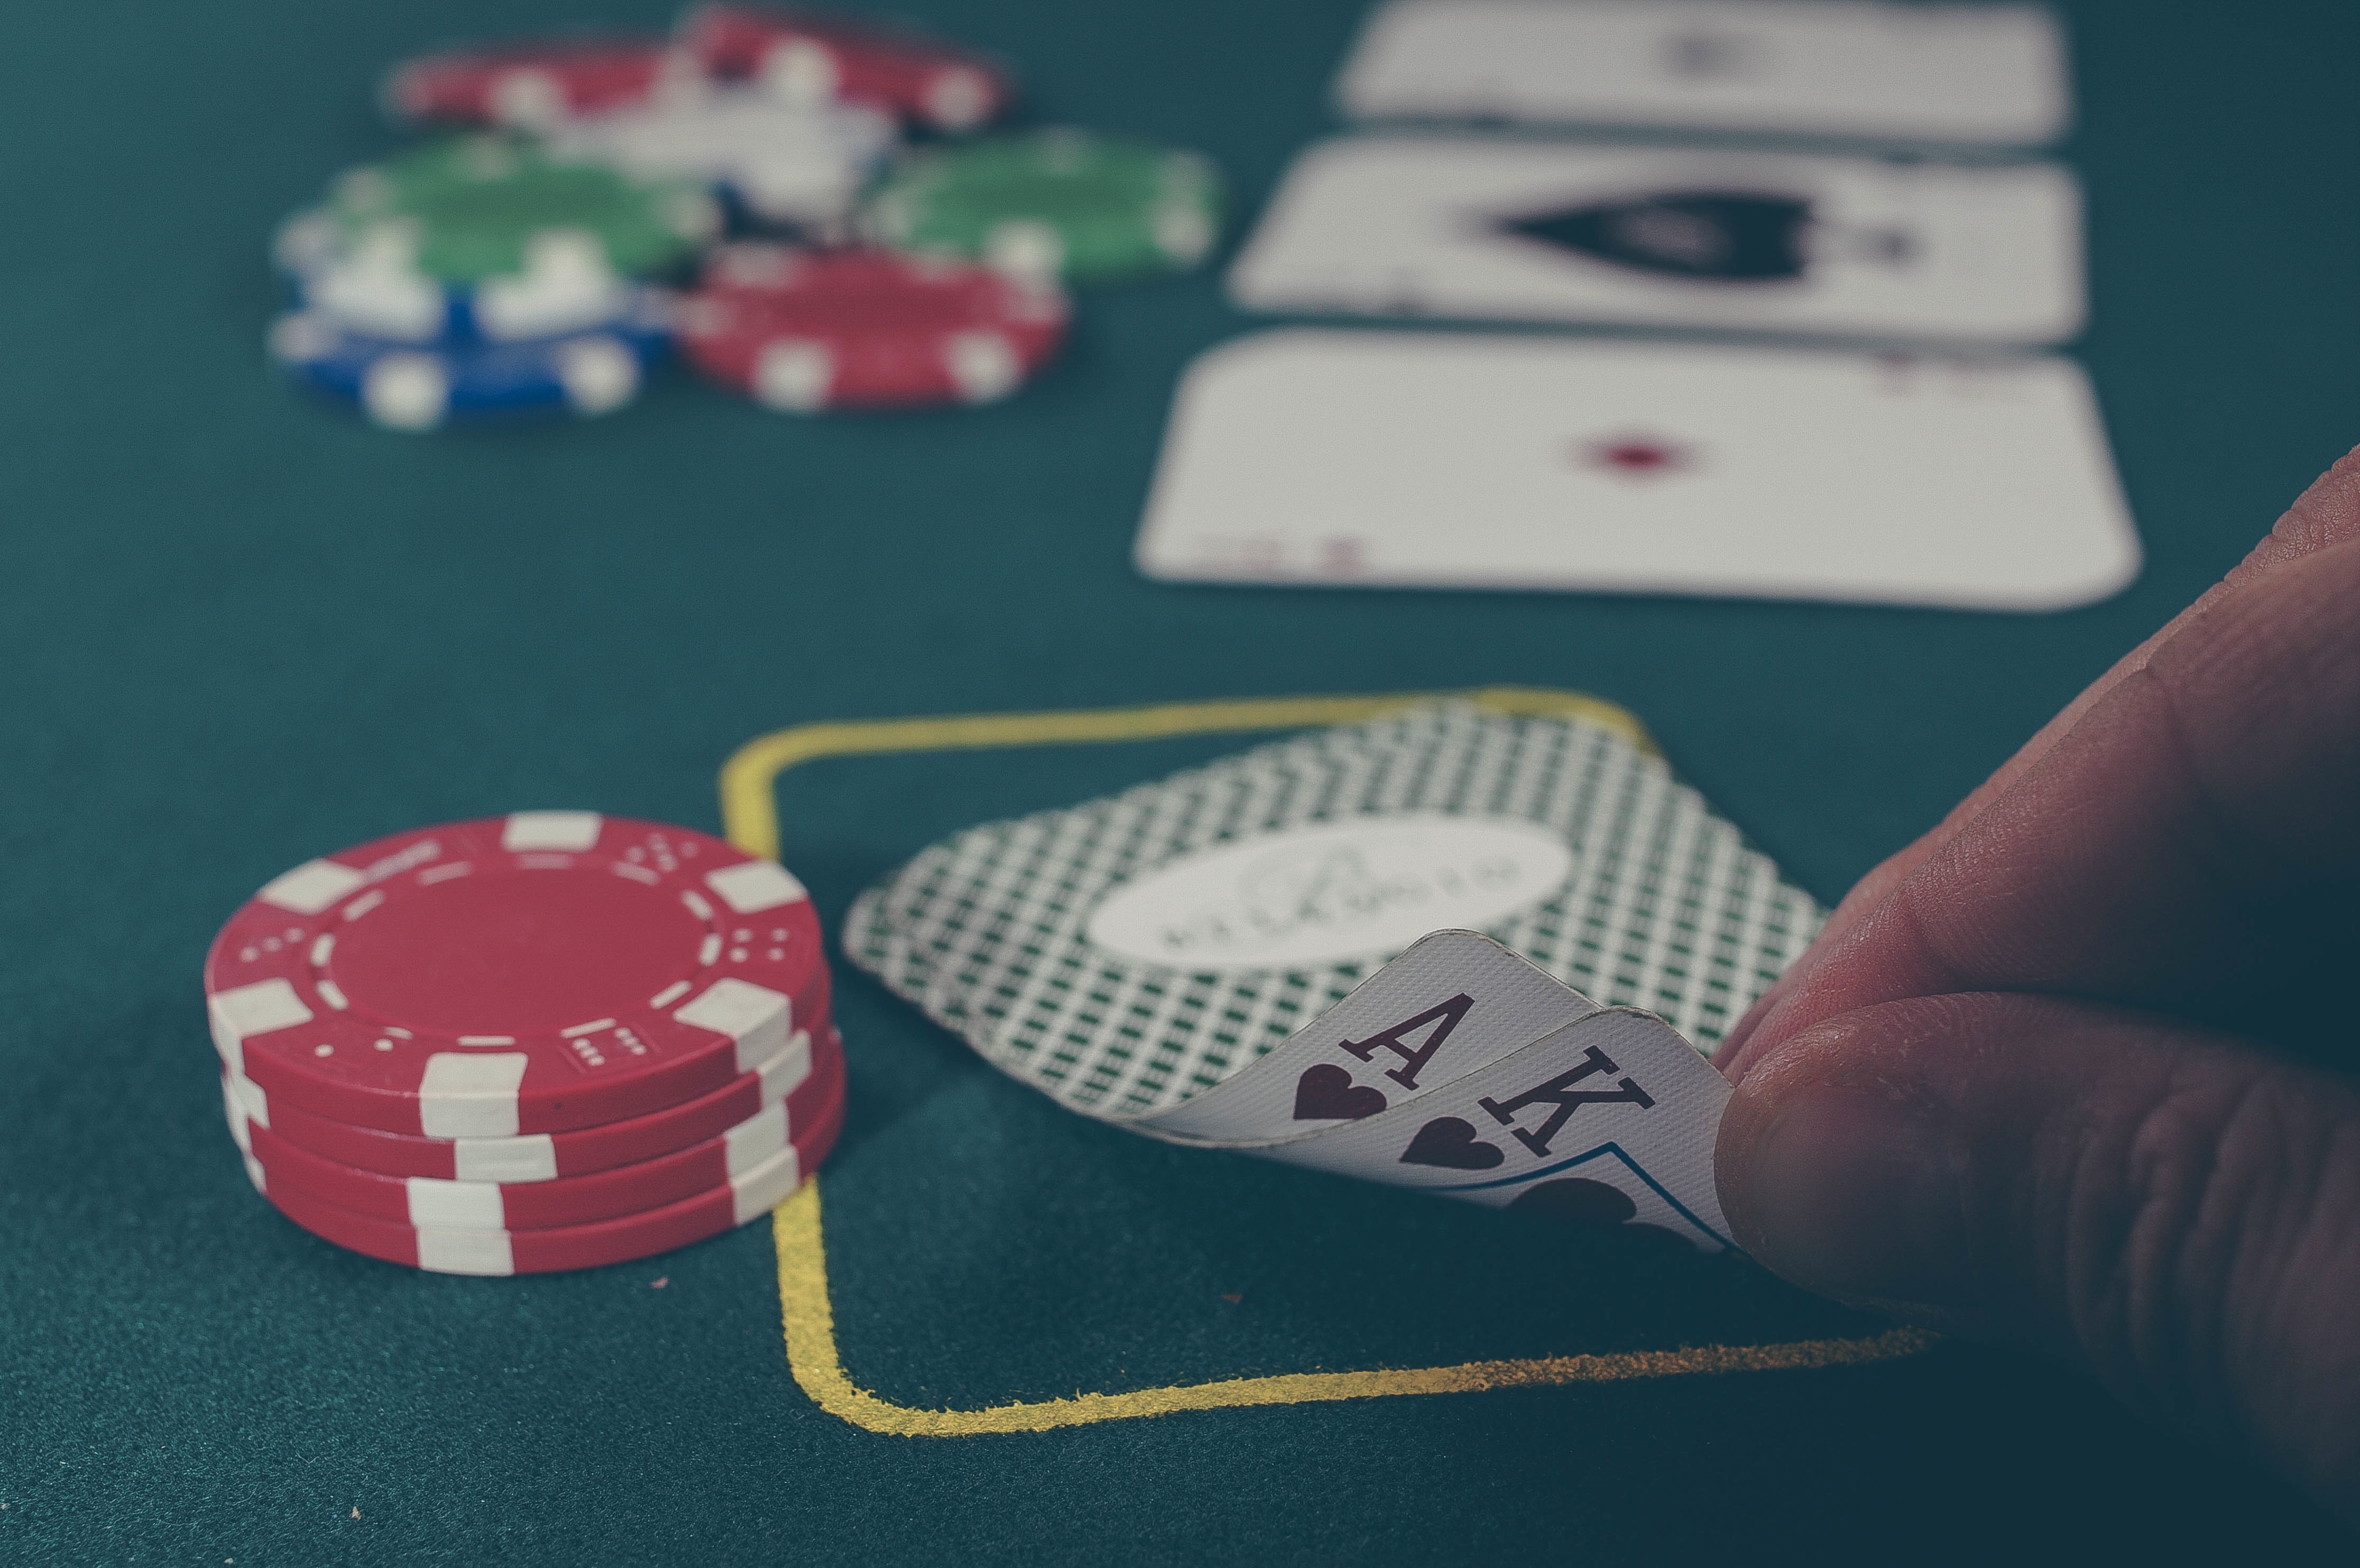 TWO MEN FINED £30,000 FOR HOSTING ILLEGAL POKER TOURNAMENTS